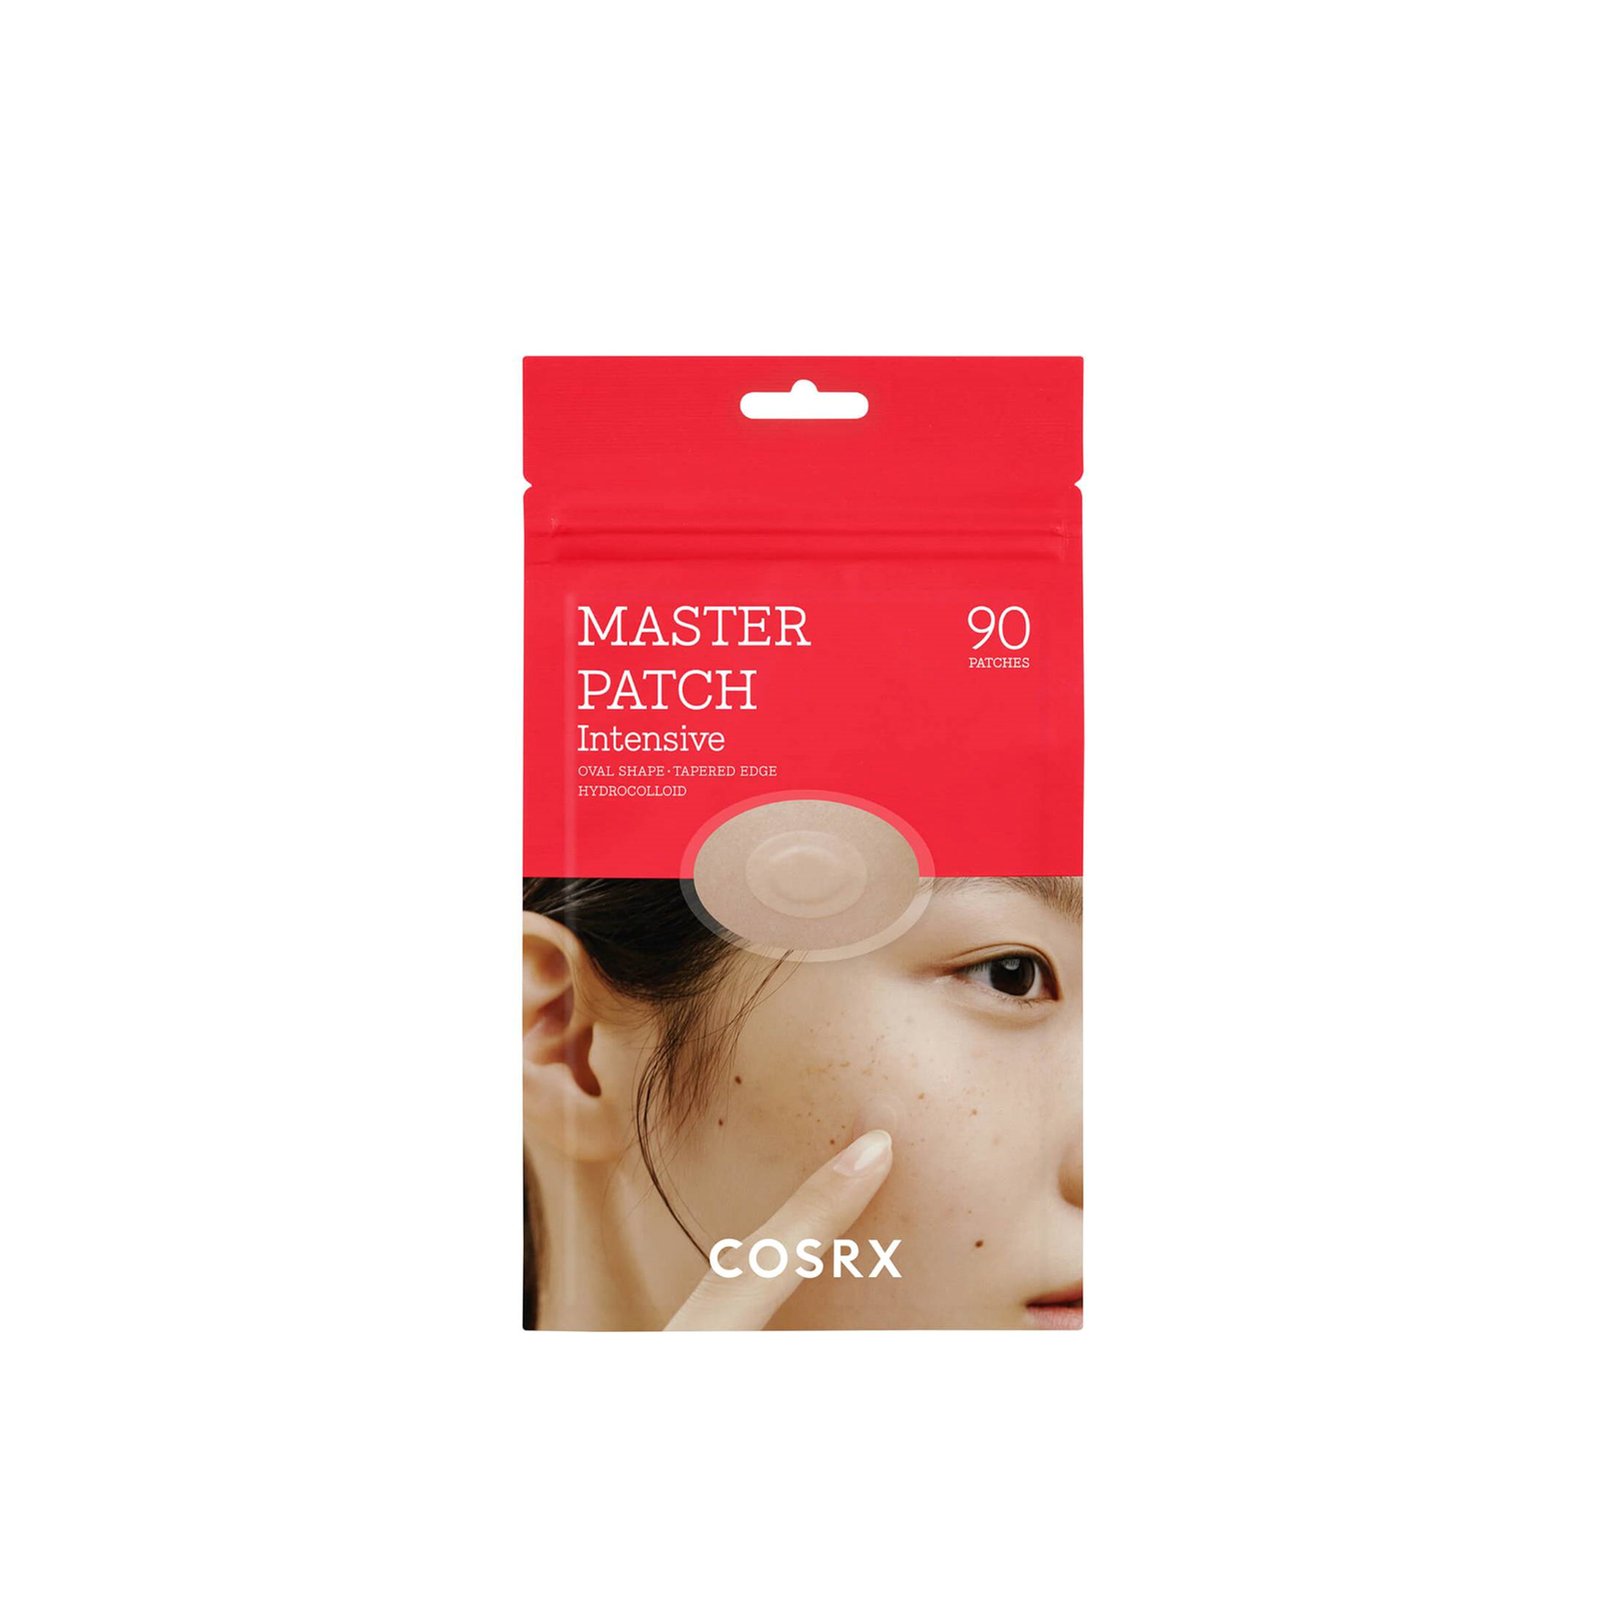 COSRX Master Patch Intensive x90